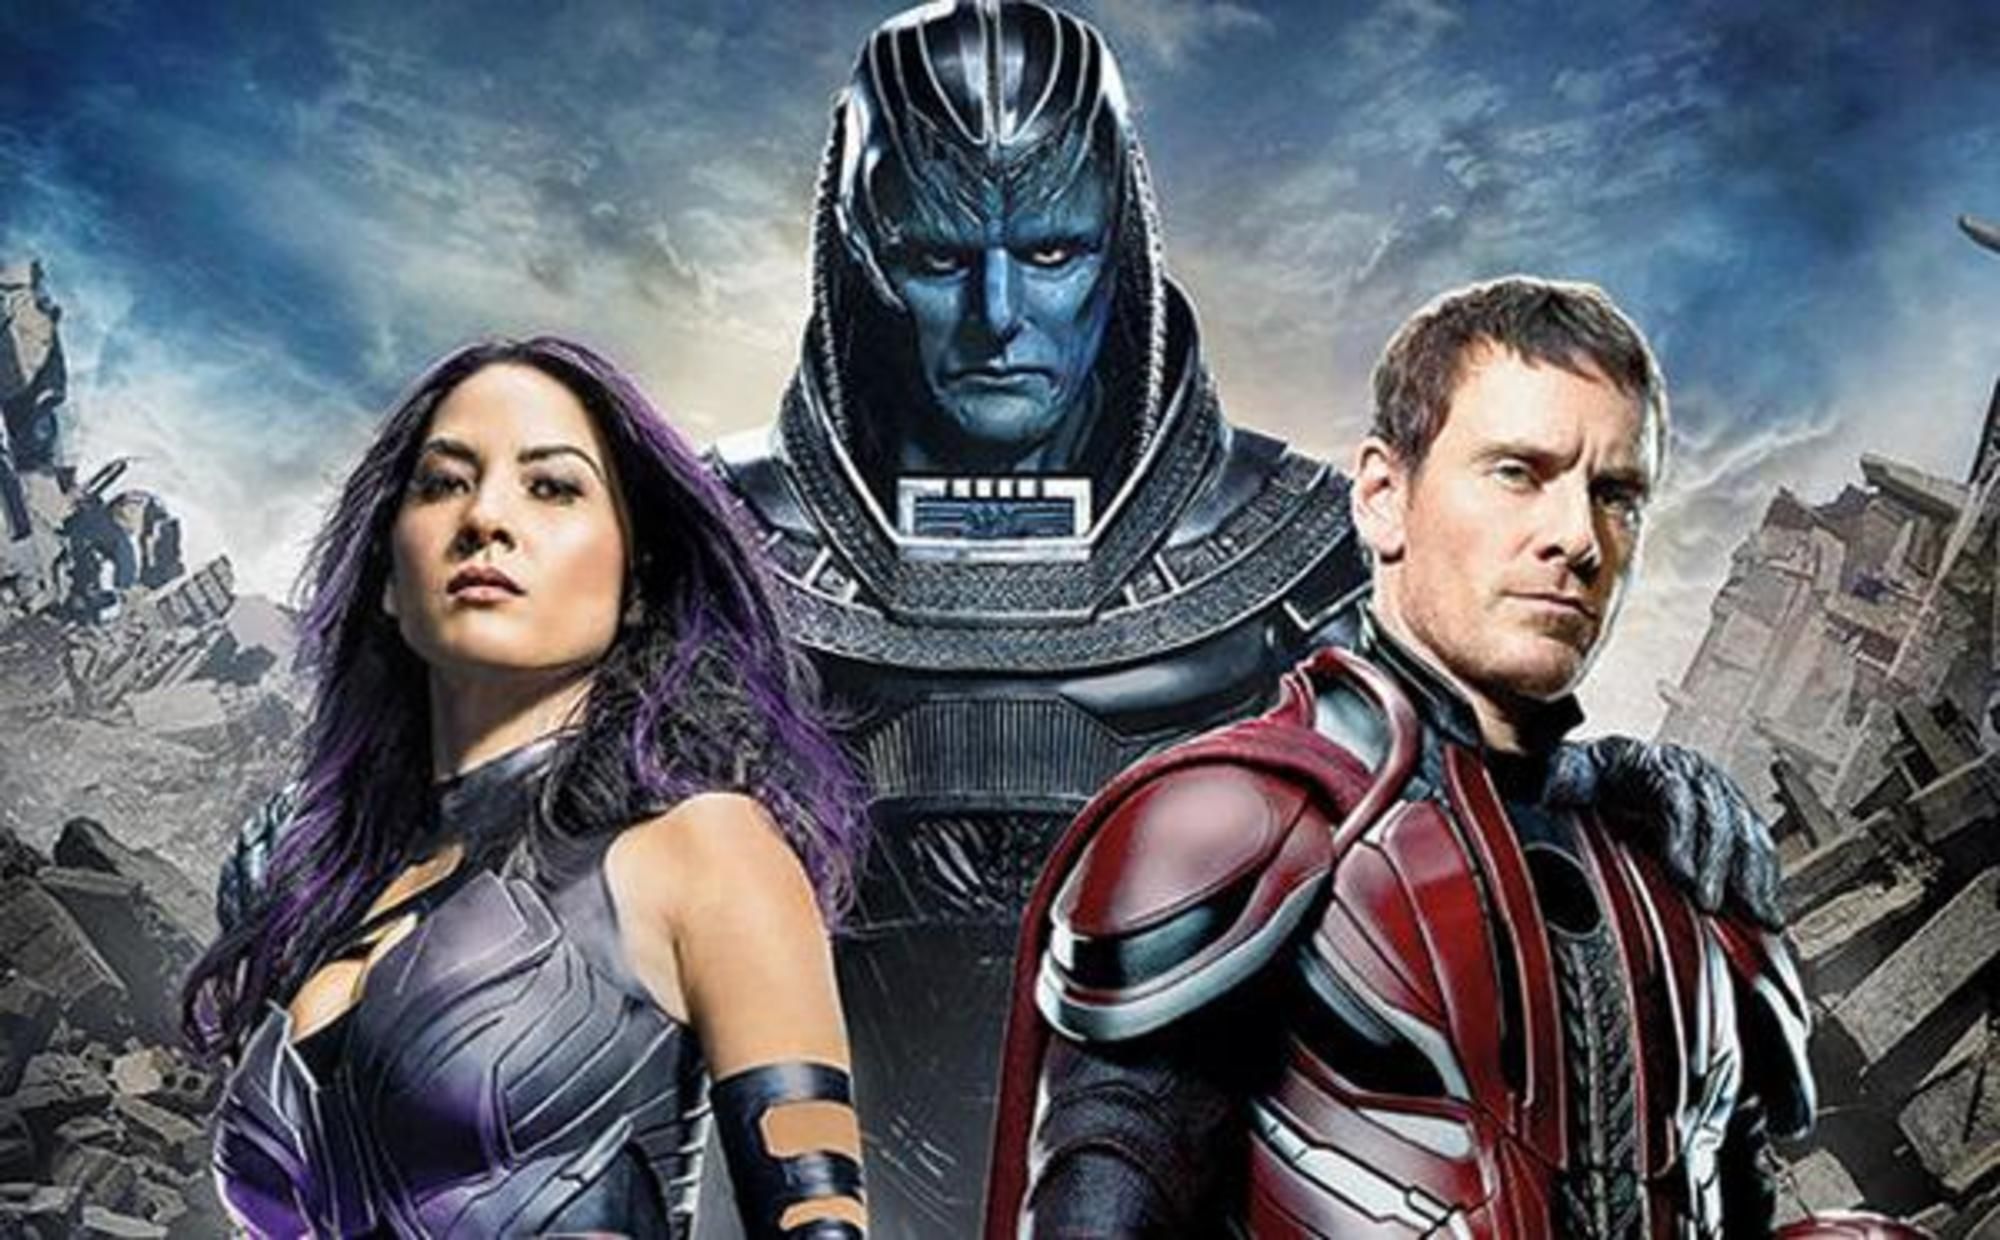 X-Men: Apocalypse wallpapers High Resolution and Quality Download